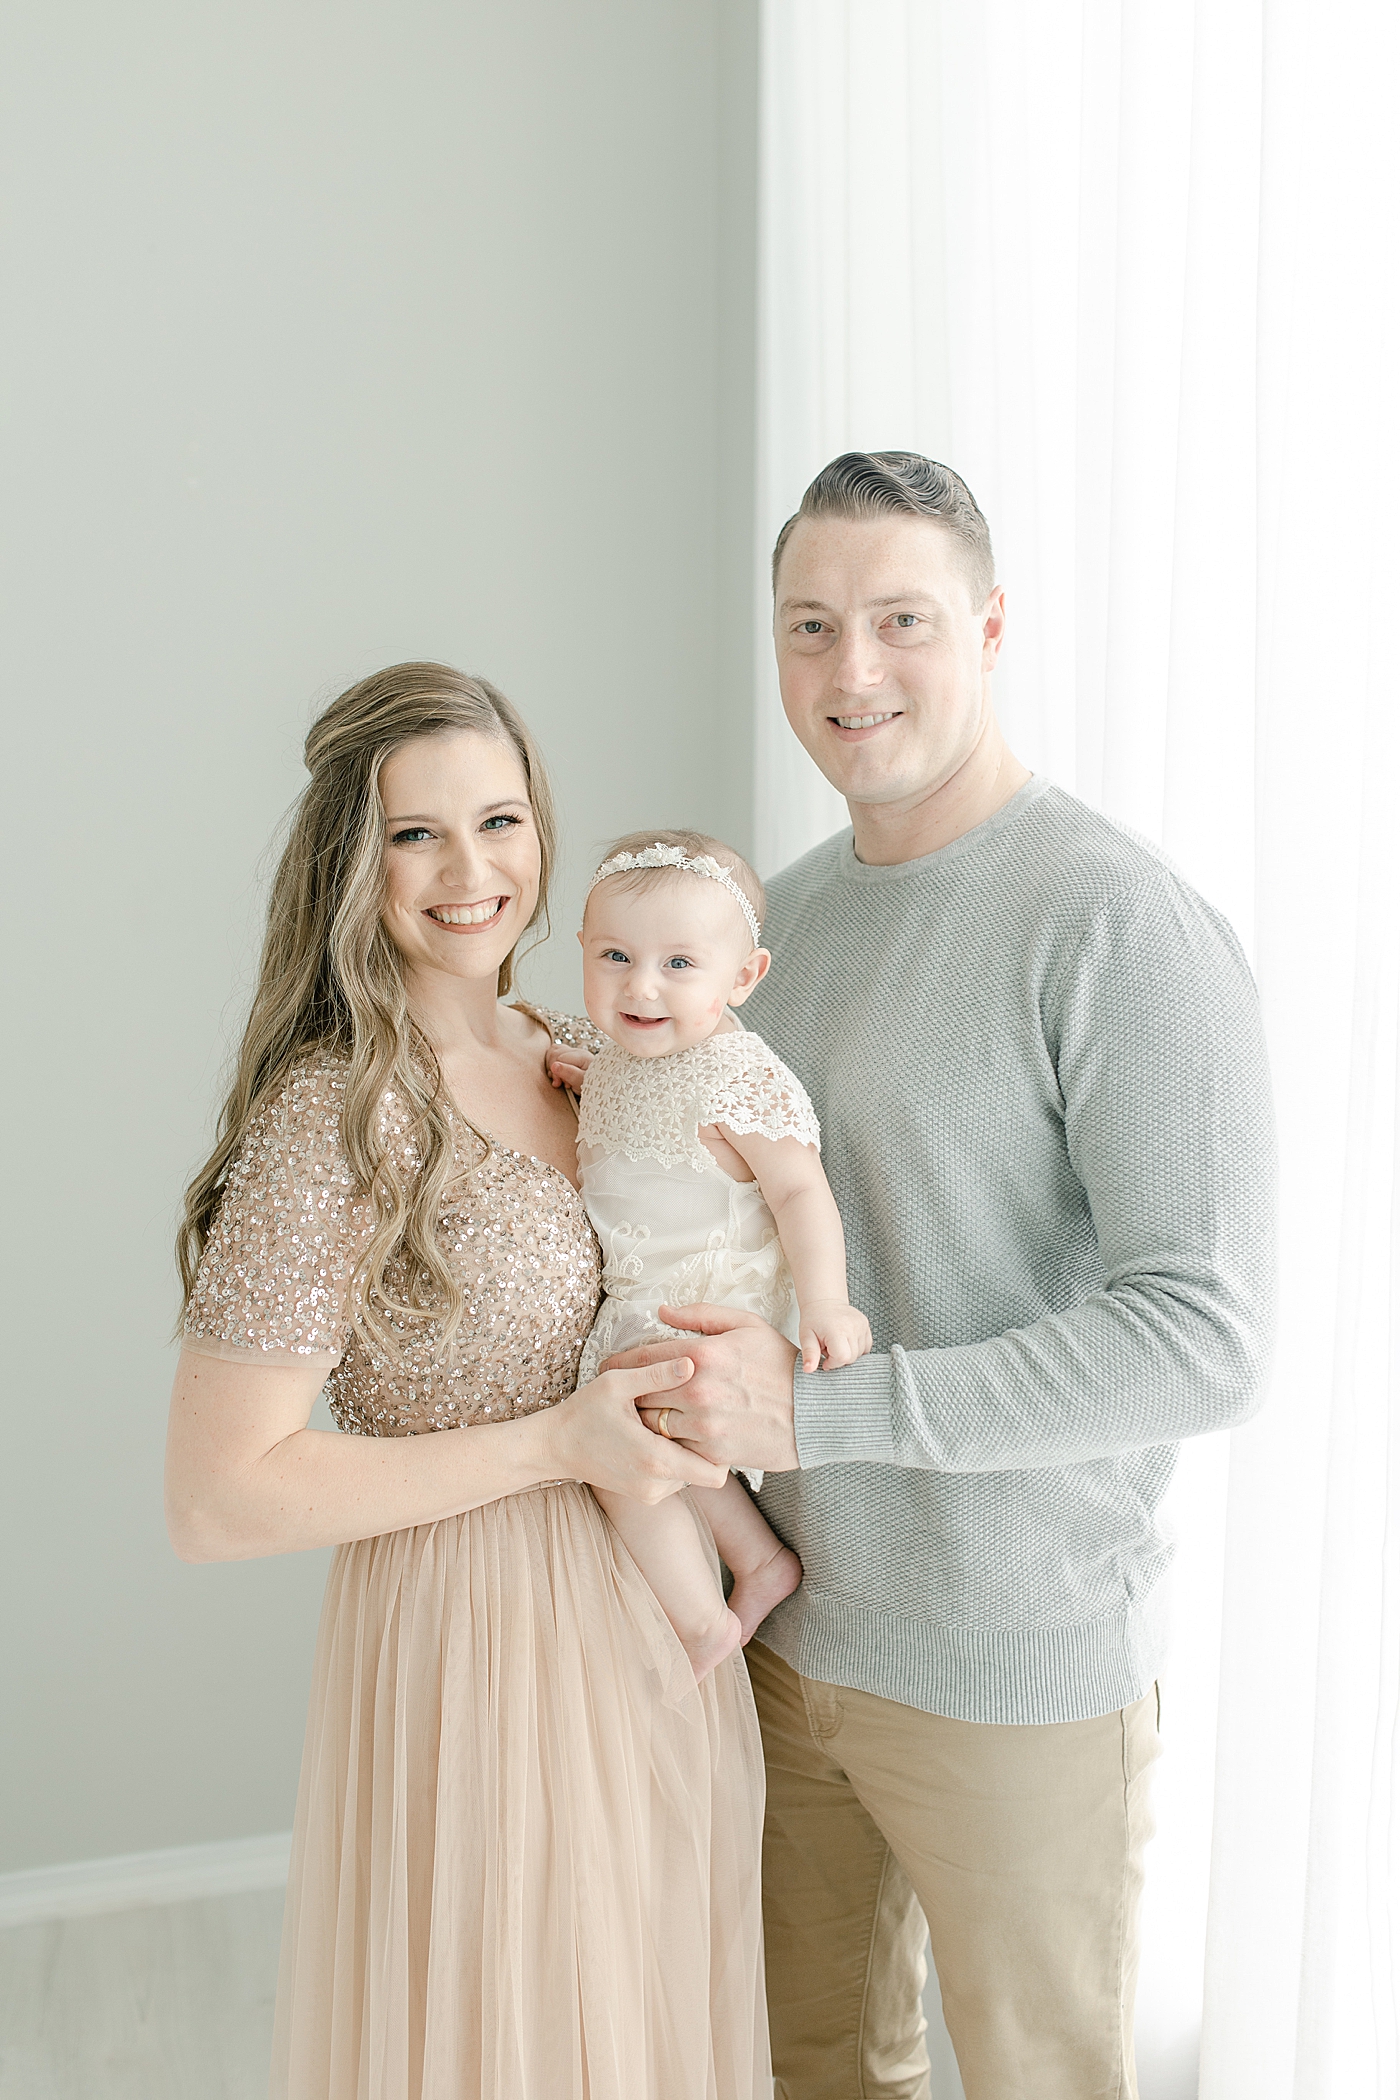 Mom and dad with their baby girl in the studio for six month milestone session | Photo by Little Sunshine Photography